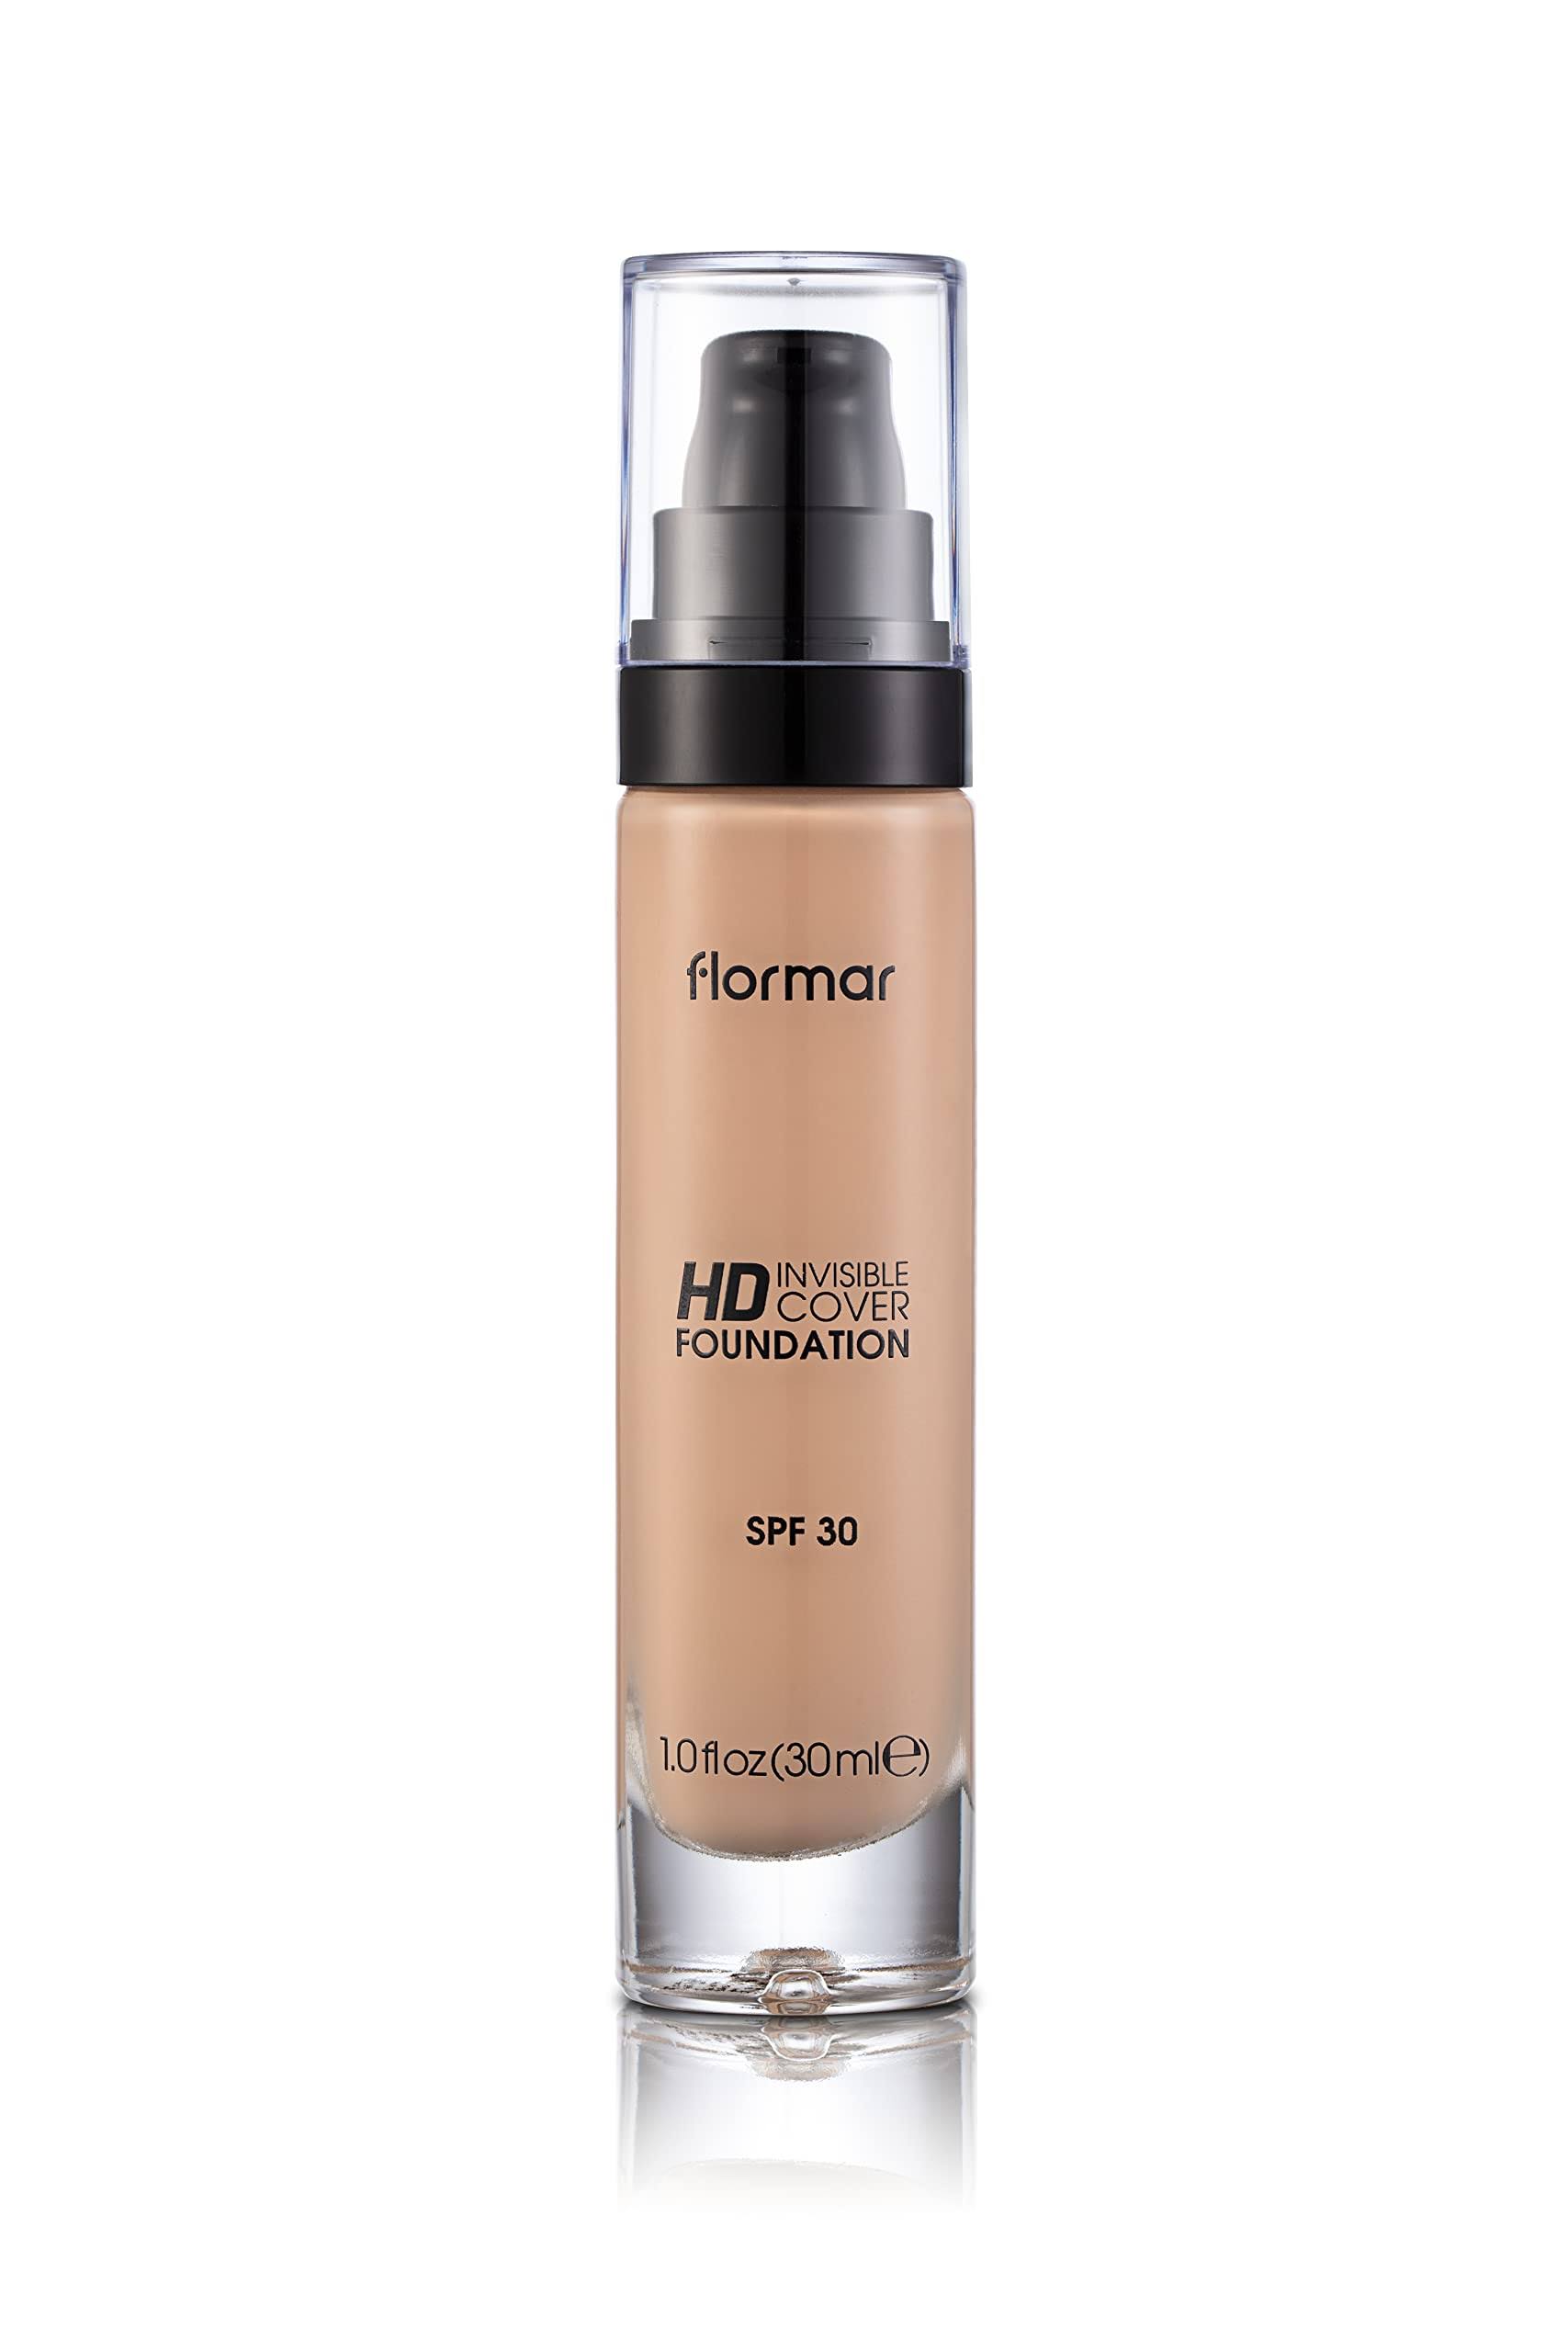 Flormar Invisible Cover HD Foundation SPF30 40 Light Ivory 30ml